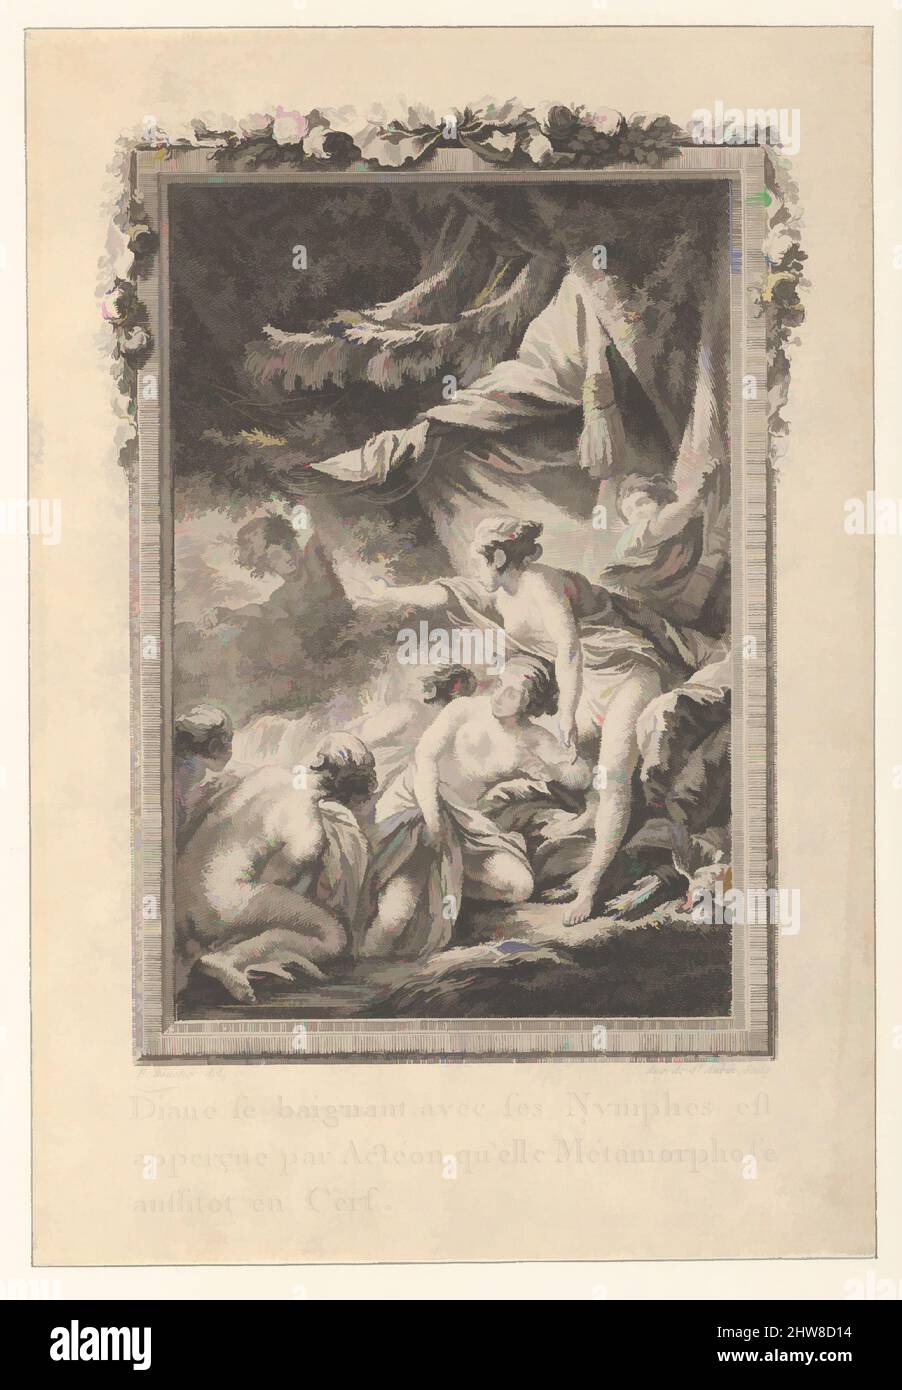 Art inspired by Vignette (Tome 1.er, page 200, lib. III, fab. 3), depicting Diana Turning Actaeon into a Stag, from Les Métamorphoses d'Ovide en Latin et en François de la traduction de M. l'Abbé Banier de l'Académie Royale des Inscriptions et Belles-Lettres. Avec des explications, Classic works modernized by Artotop with a splash of modernity. Shapes, color and value, eye-catching visual impact on art. Emotions through freedom of artworks in a contemporary way. A timeless message pursuing a wildly creative new direction. Artists turning to the digital medium and creating the Artotop NFT Stock Photo